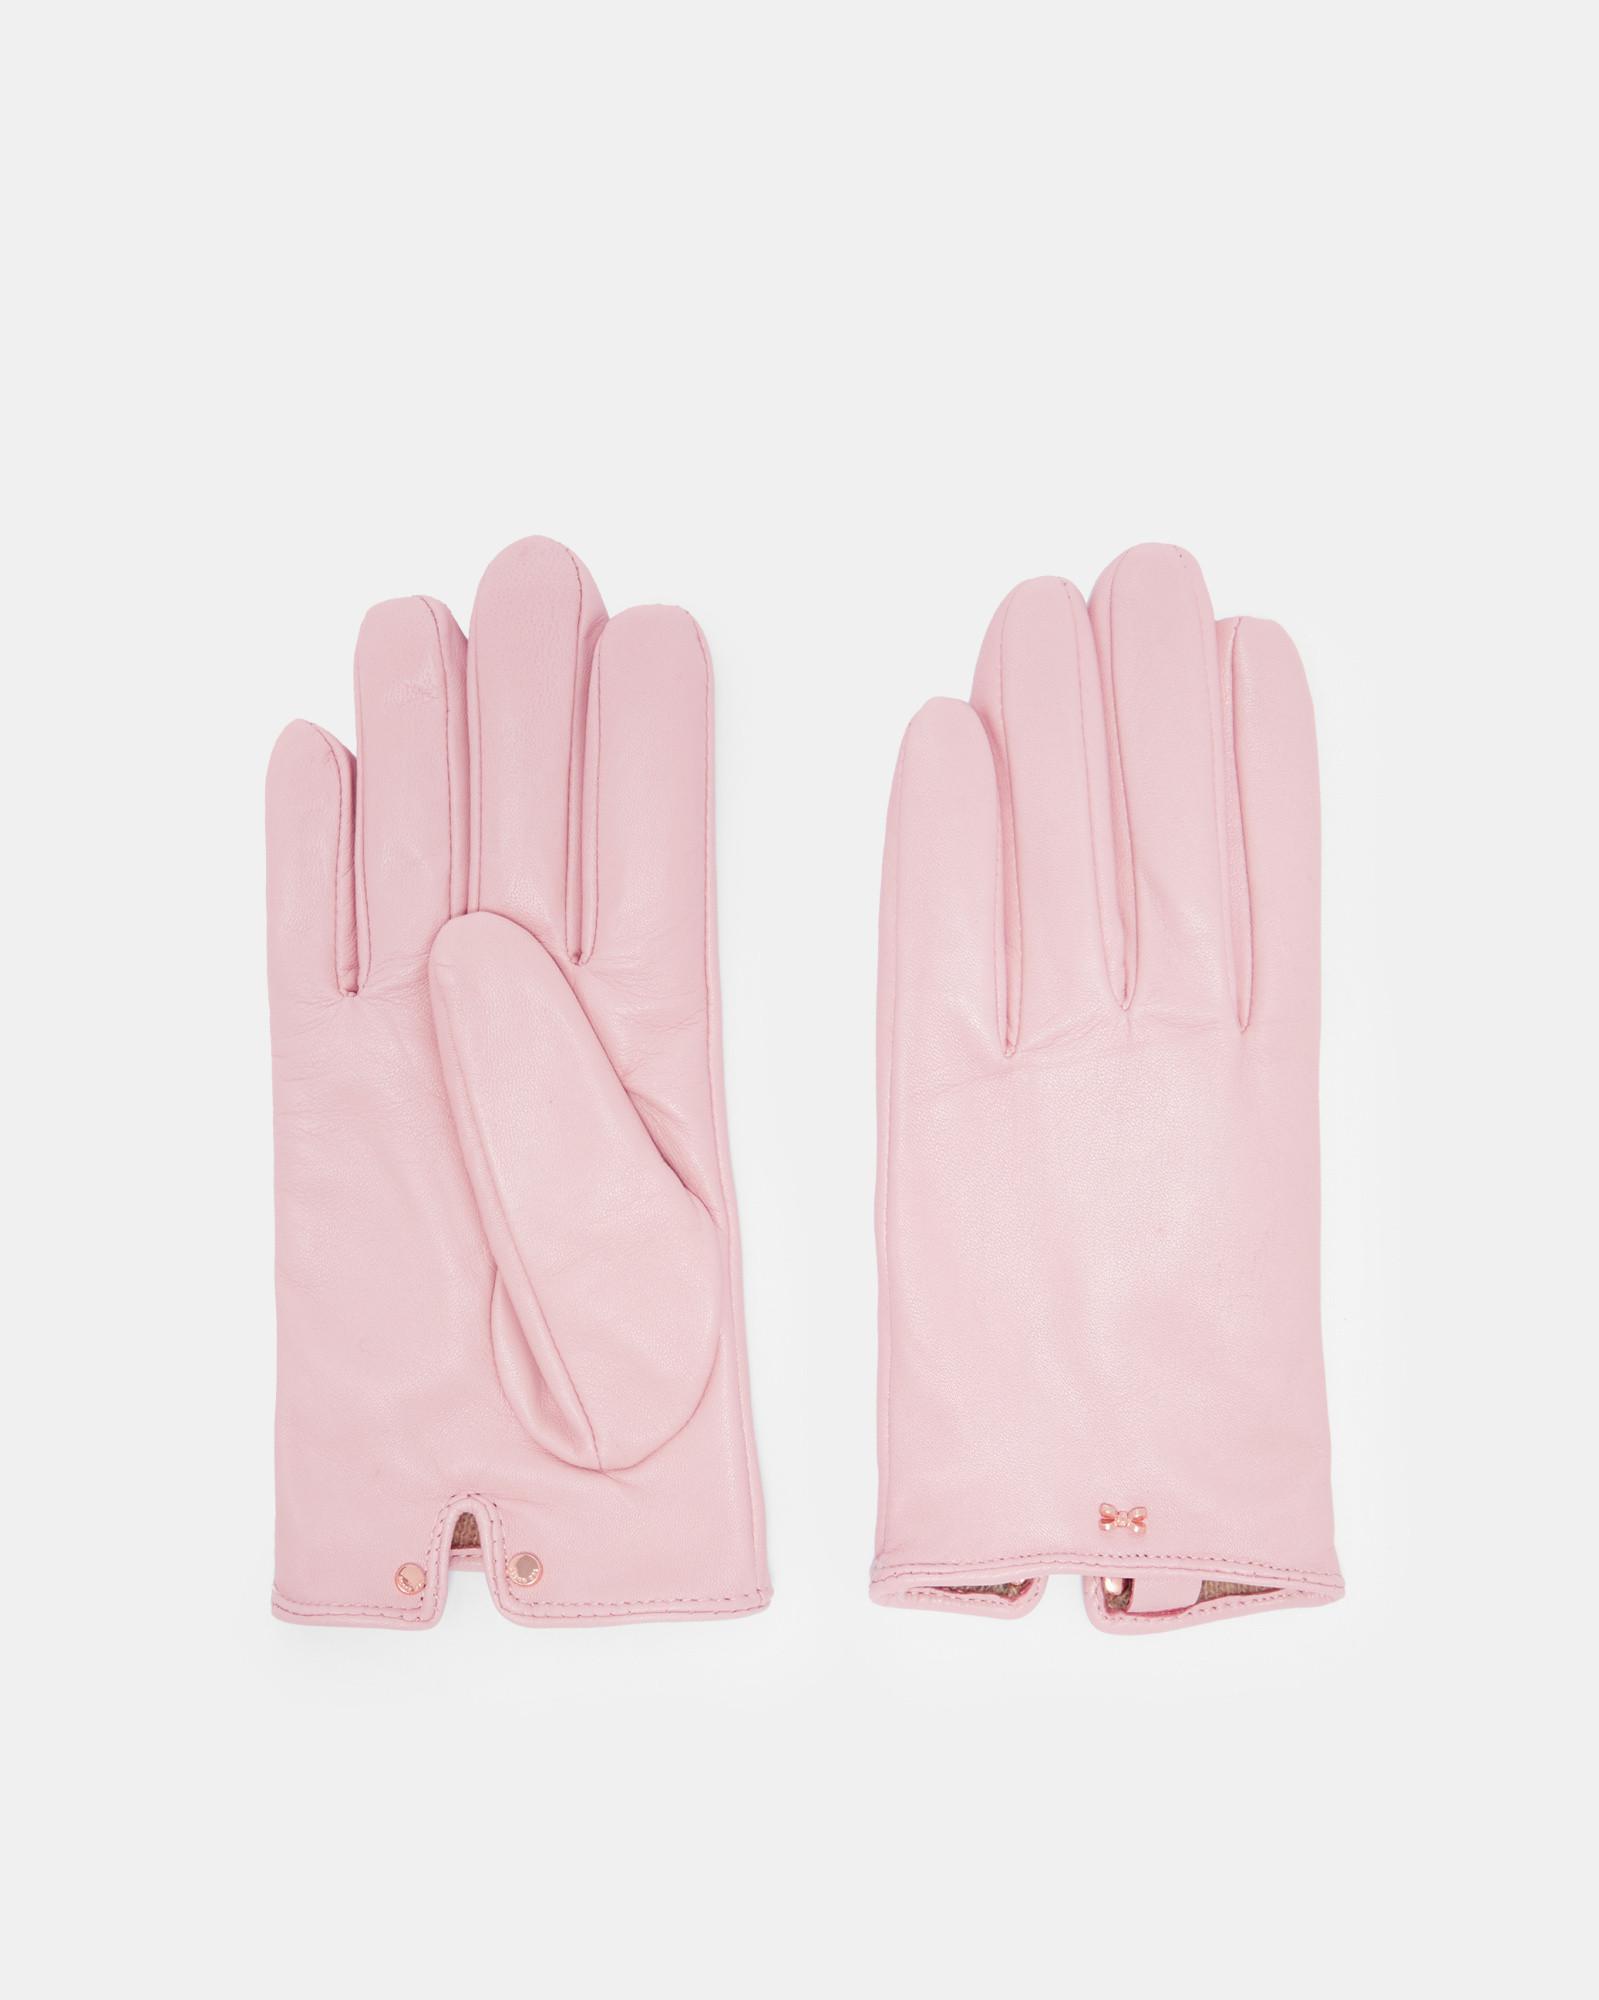 Ted Baker Bow Detail Leather Glove in Light Pink (Pink) - Lyst